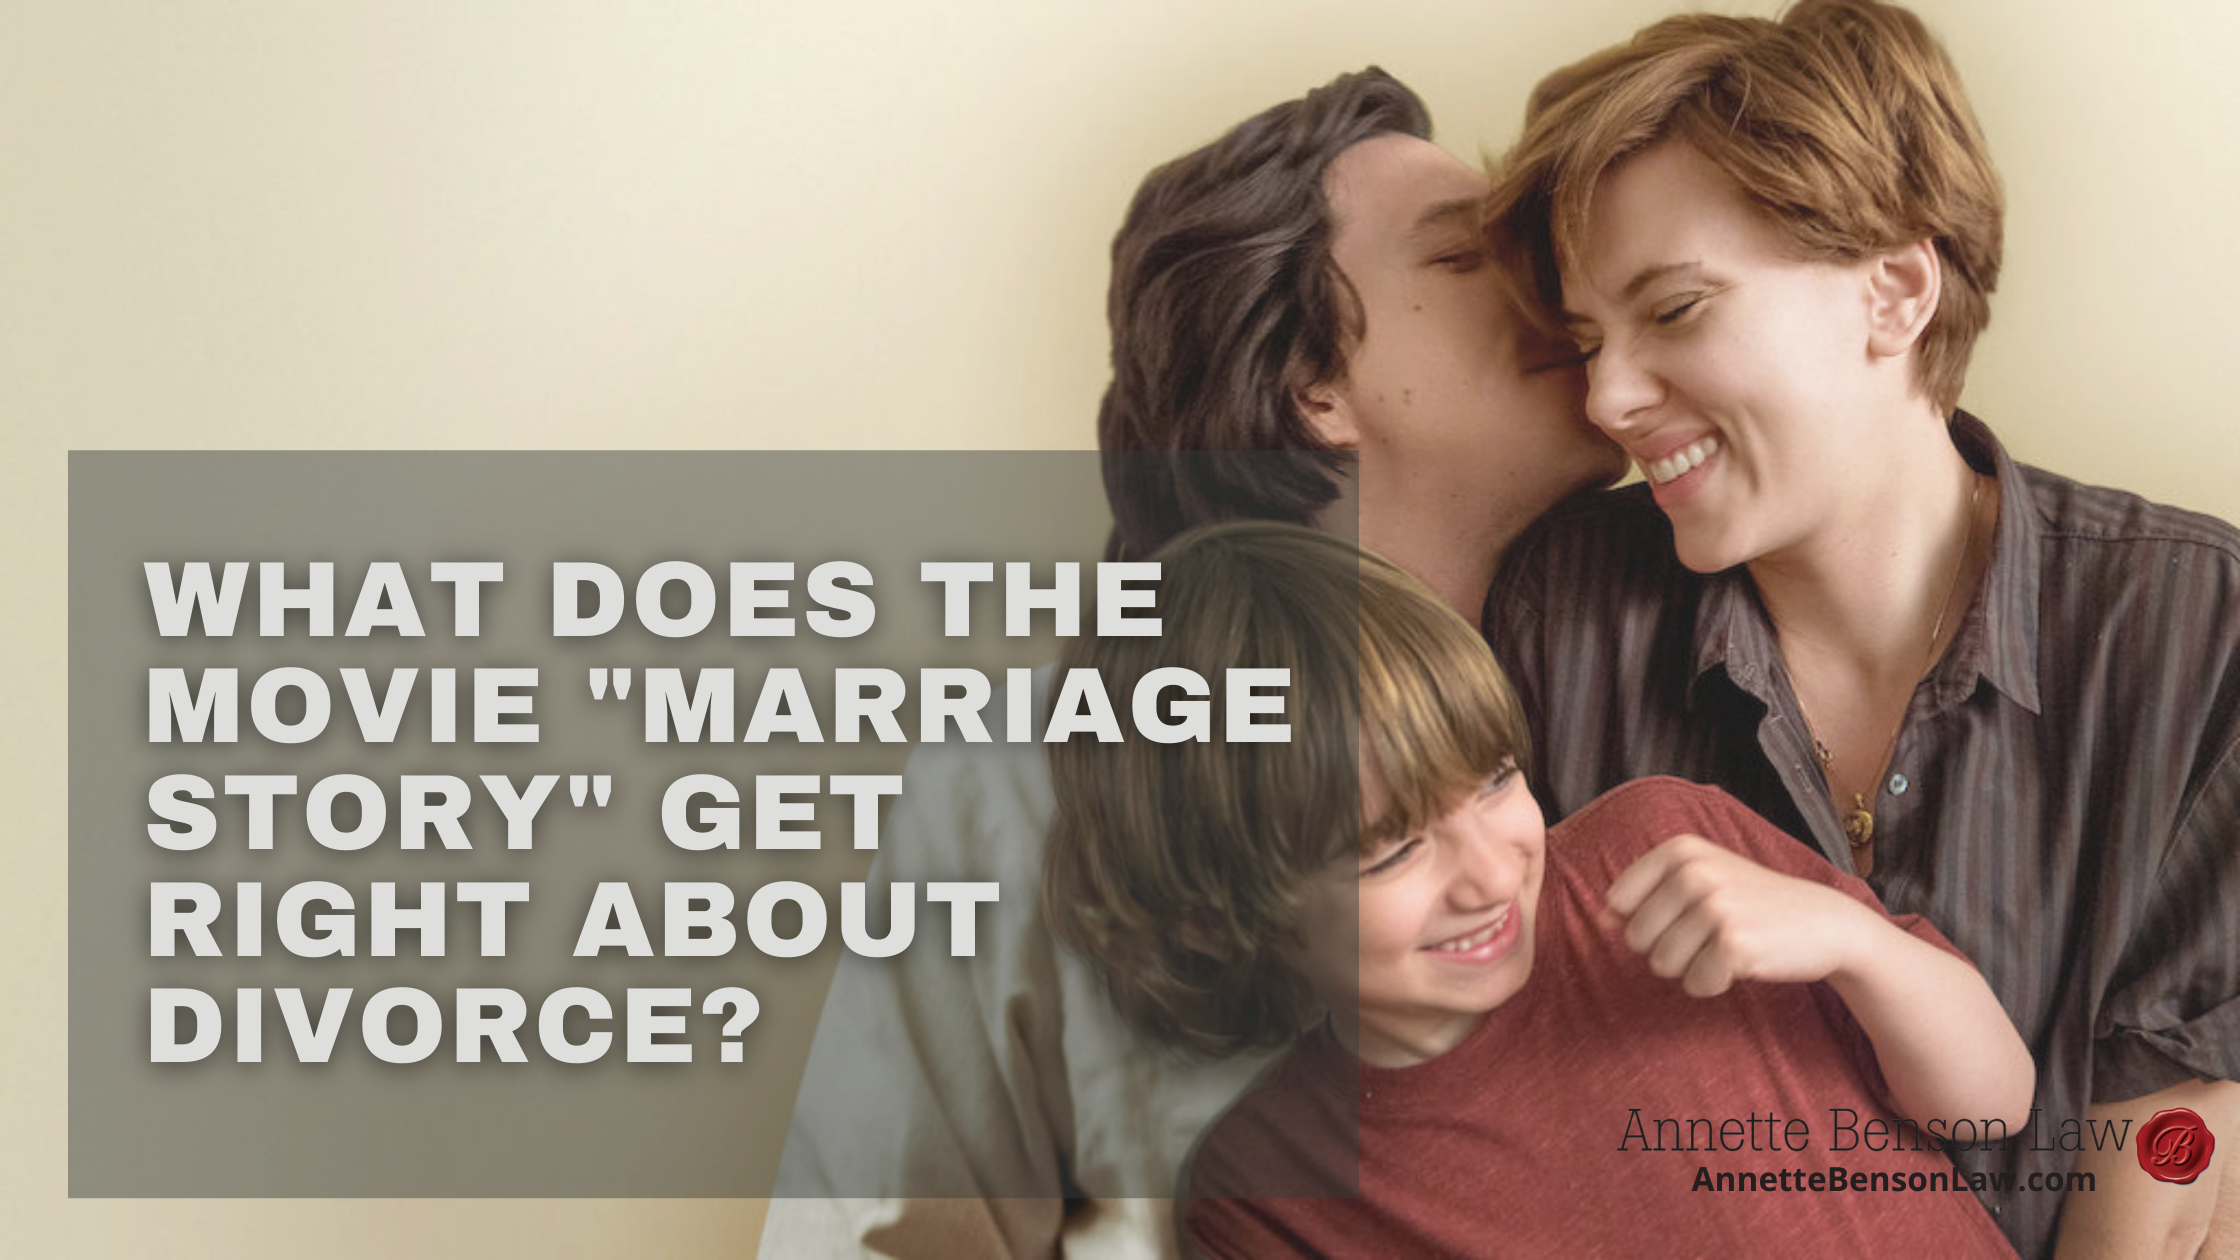 What does A Marriage Story get right about divorce?